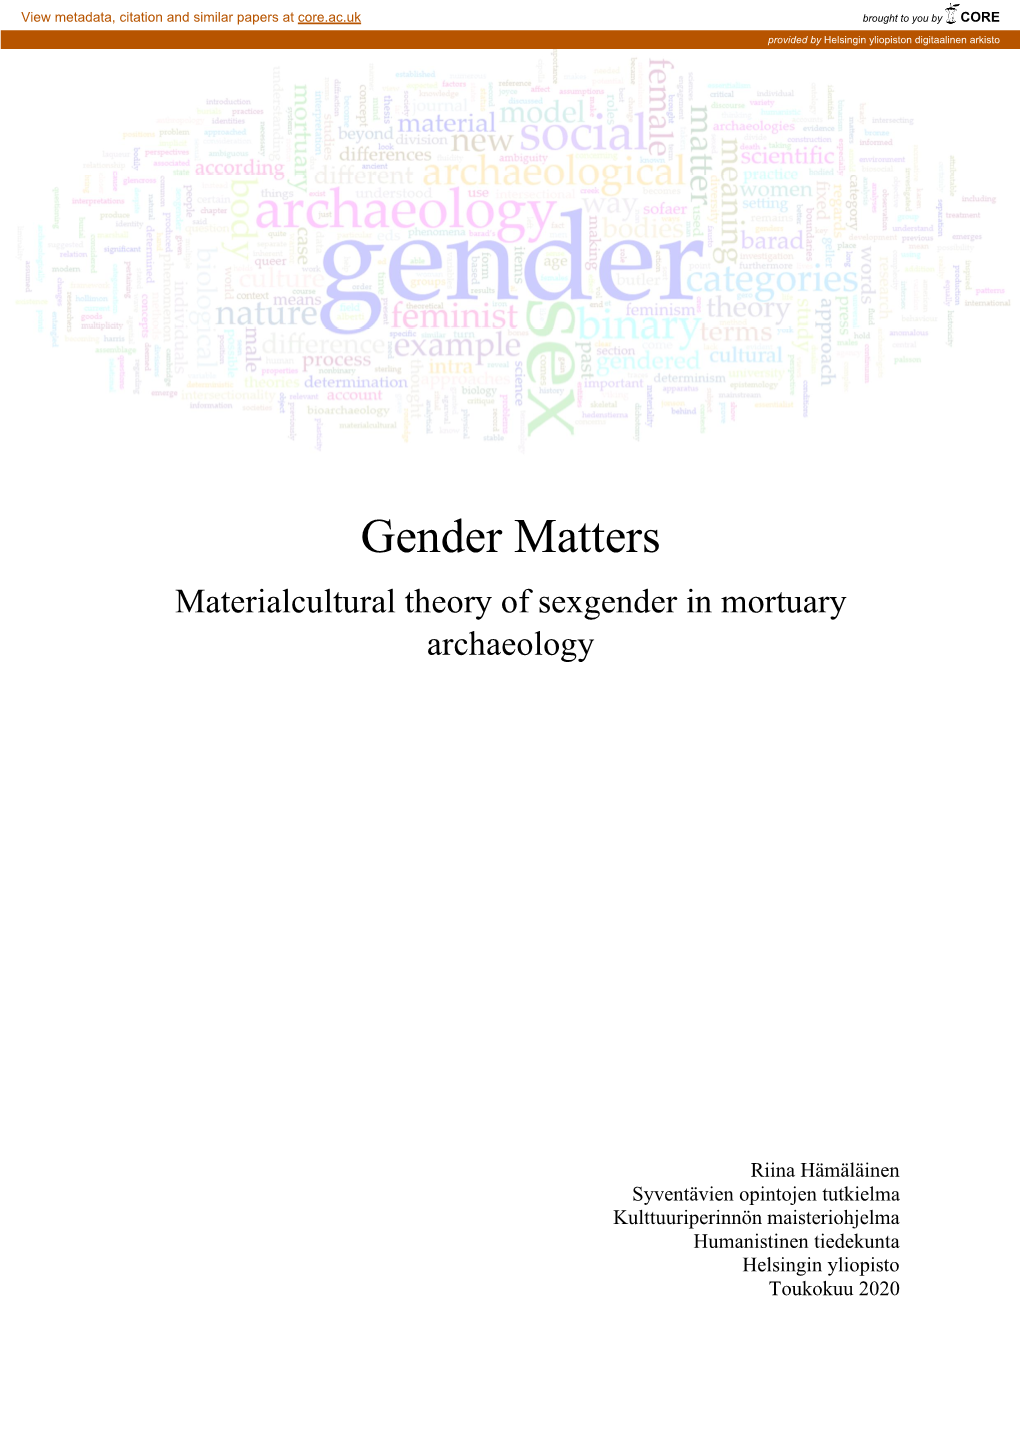 Gender Matters Materialcultural Theory of Sexgender in Mortuary Archaeology